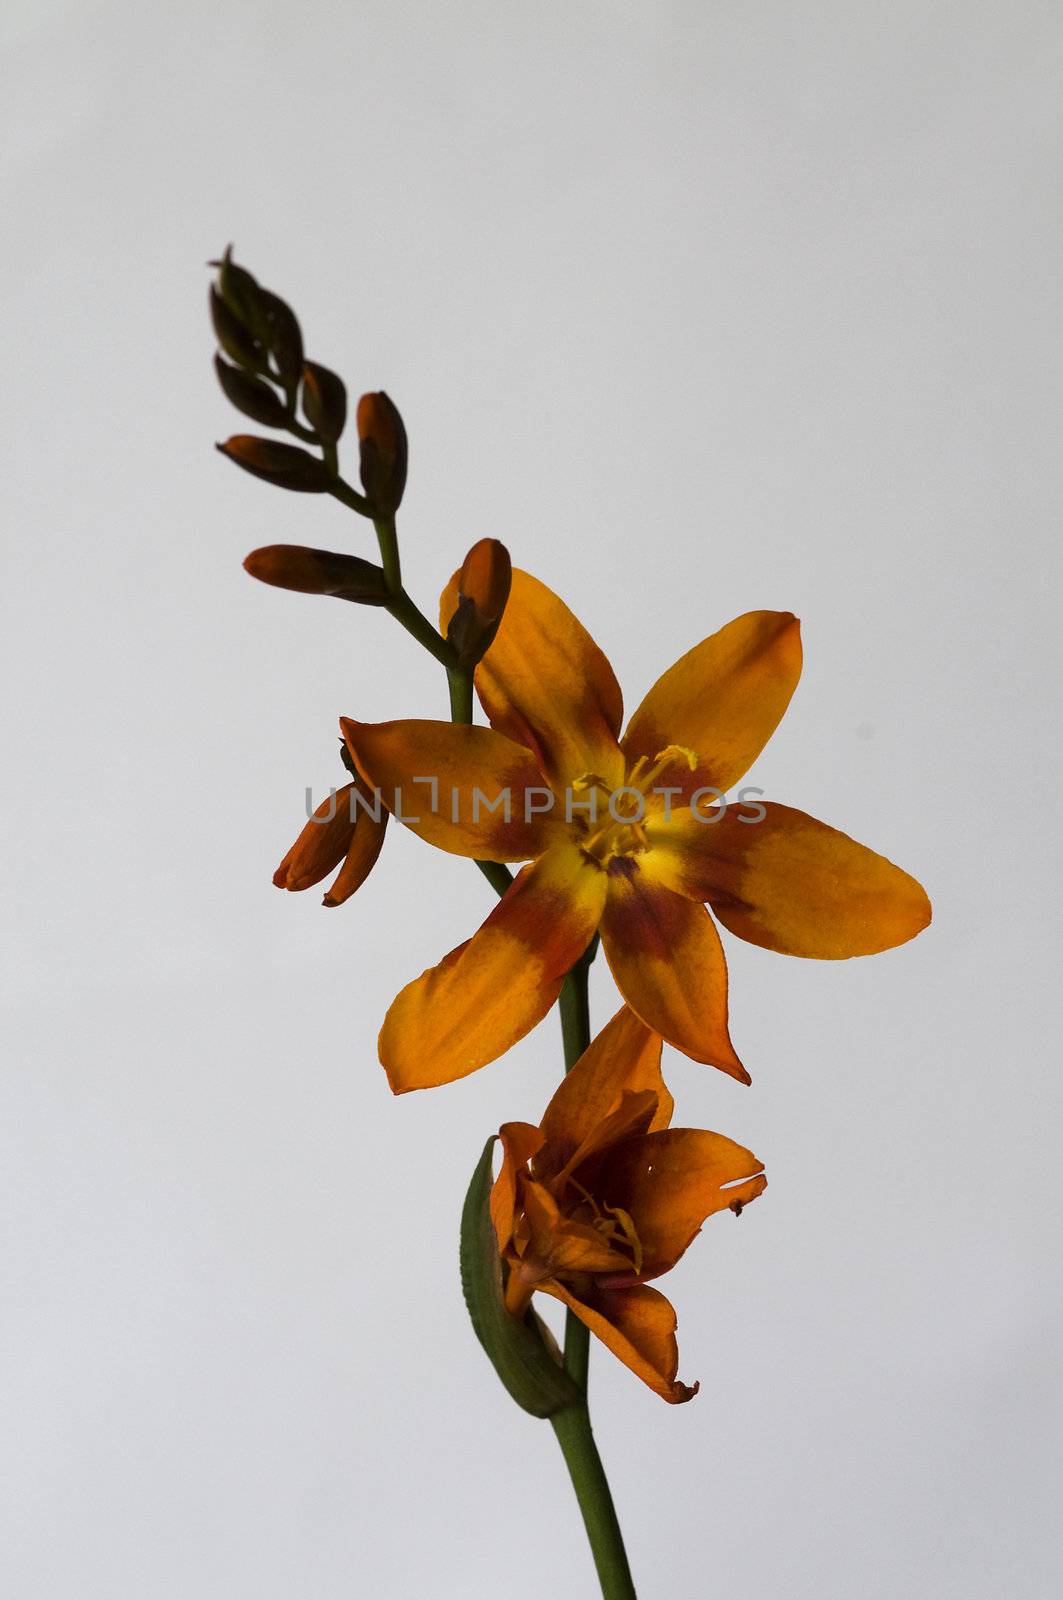 flower in orange color with a grey background